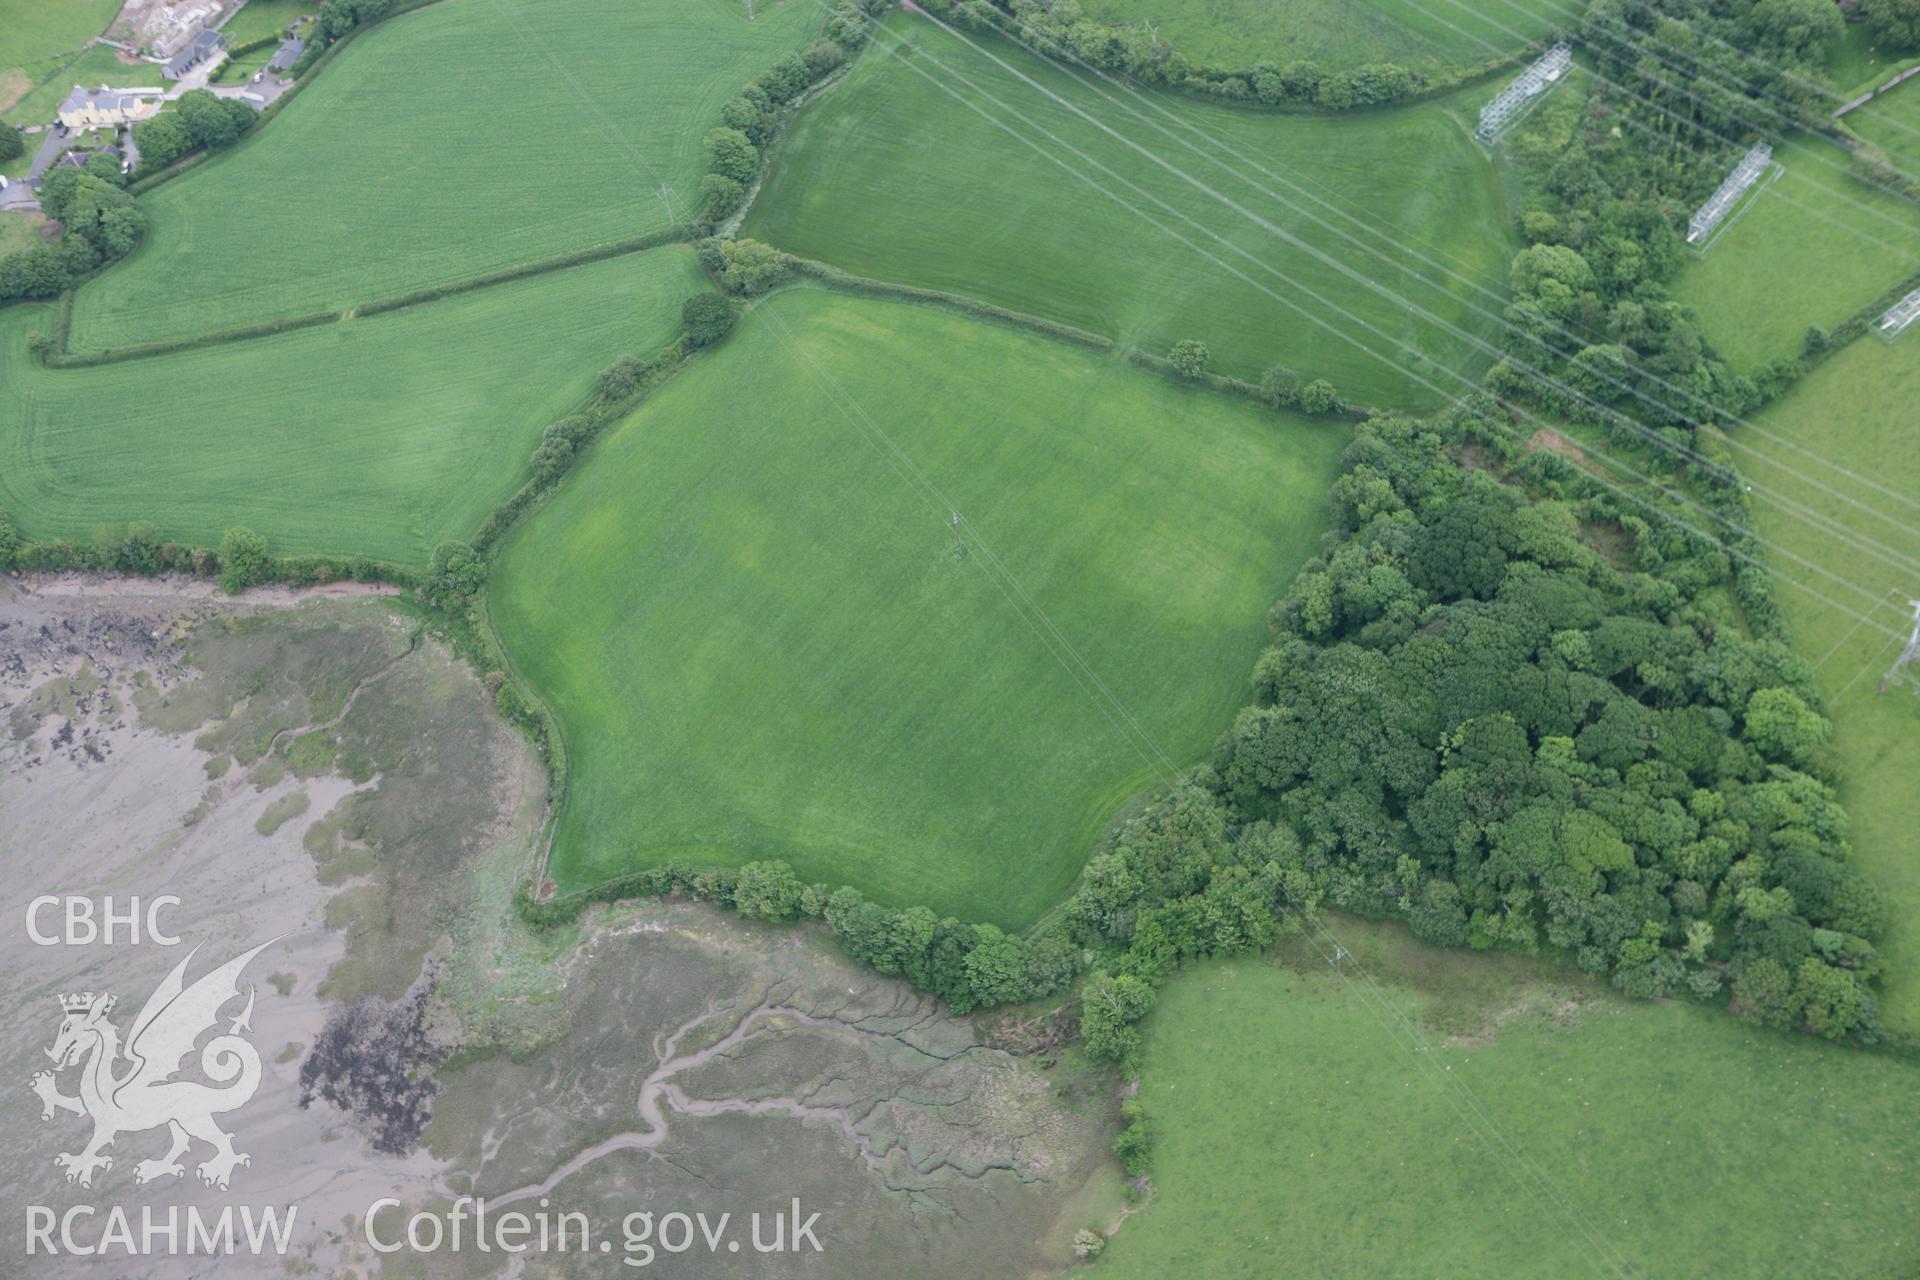 RCAHMW colour oblique photograph of Brownslate, cropmarks of possible enclosure. Taken by Toby Driver on 11/06/2010.